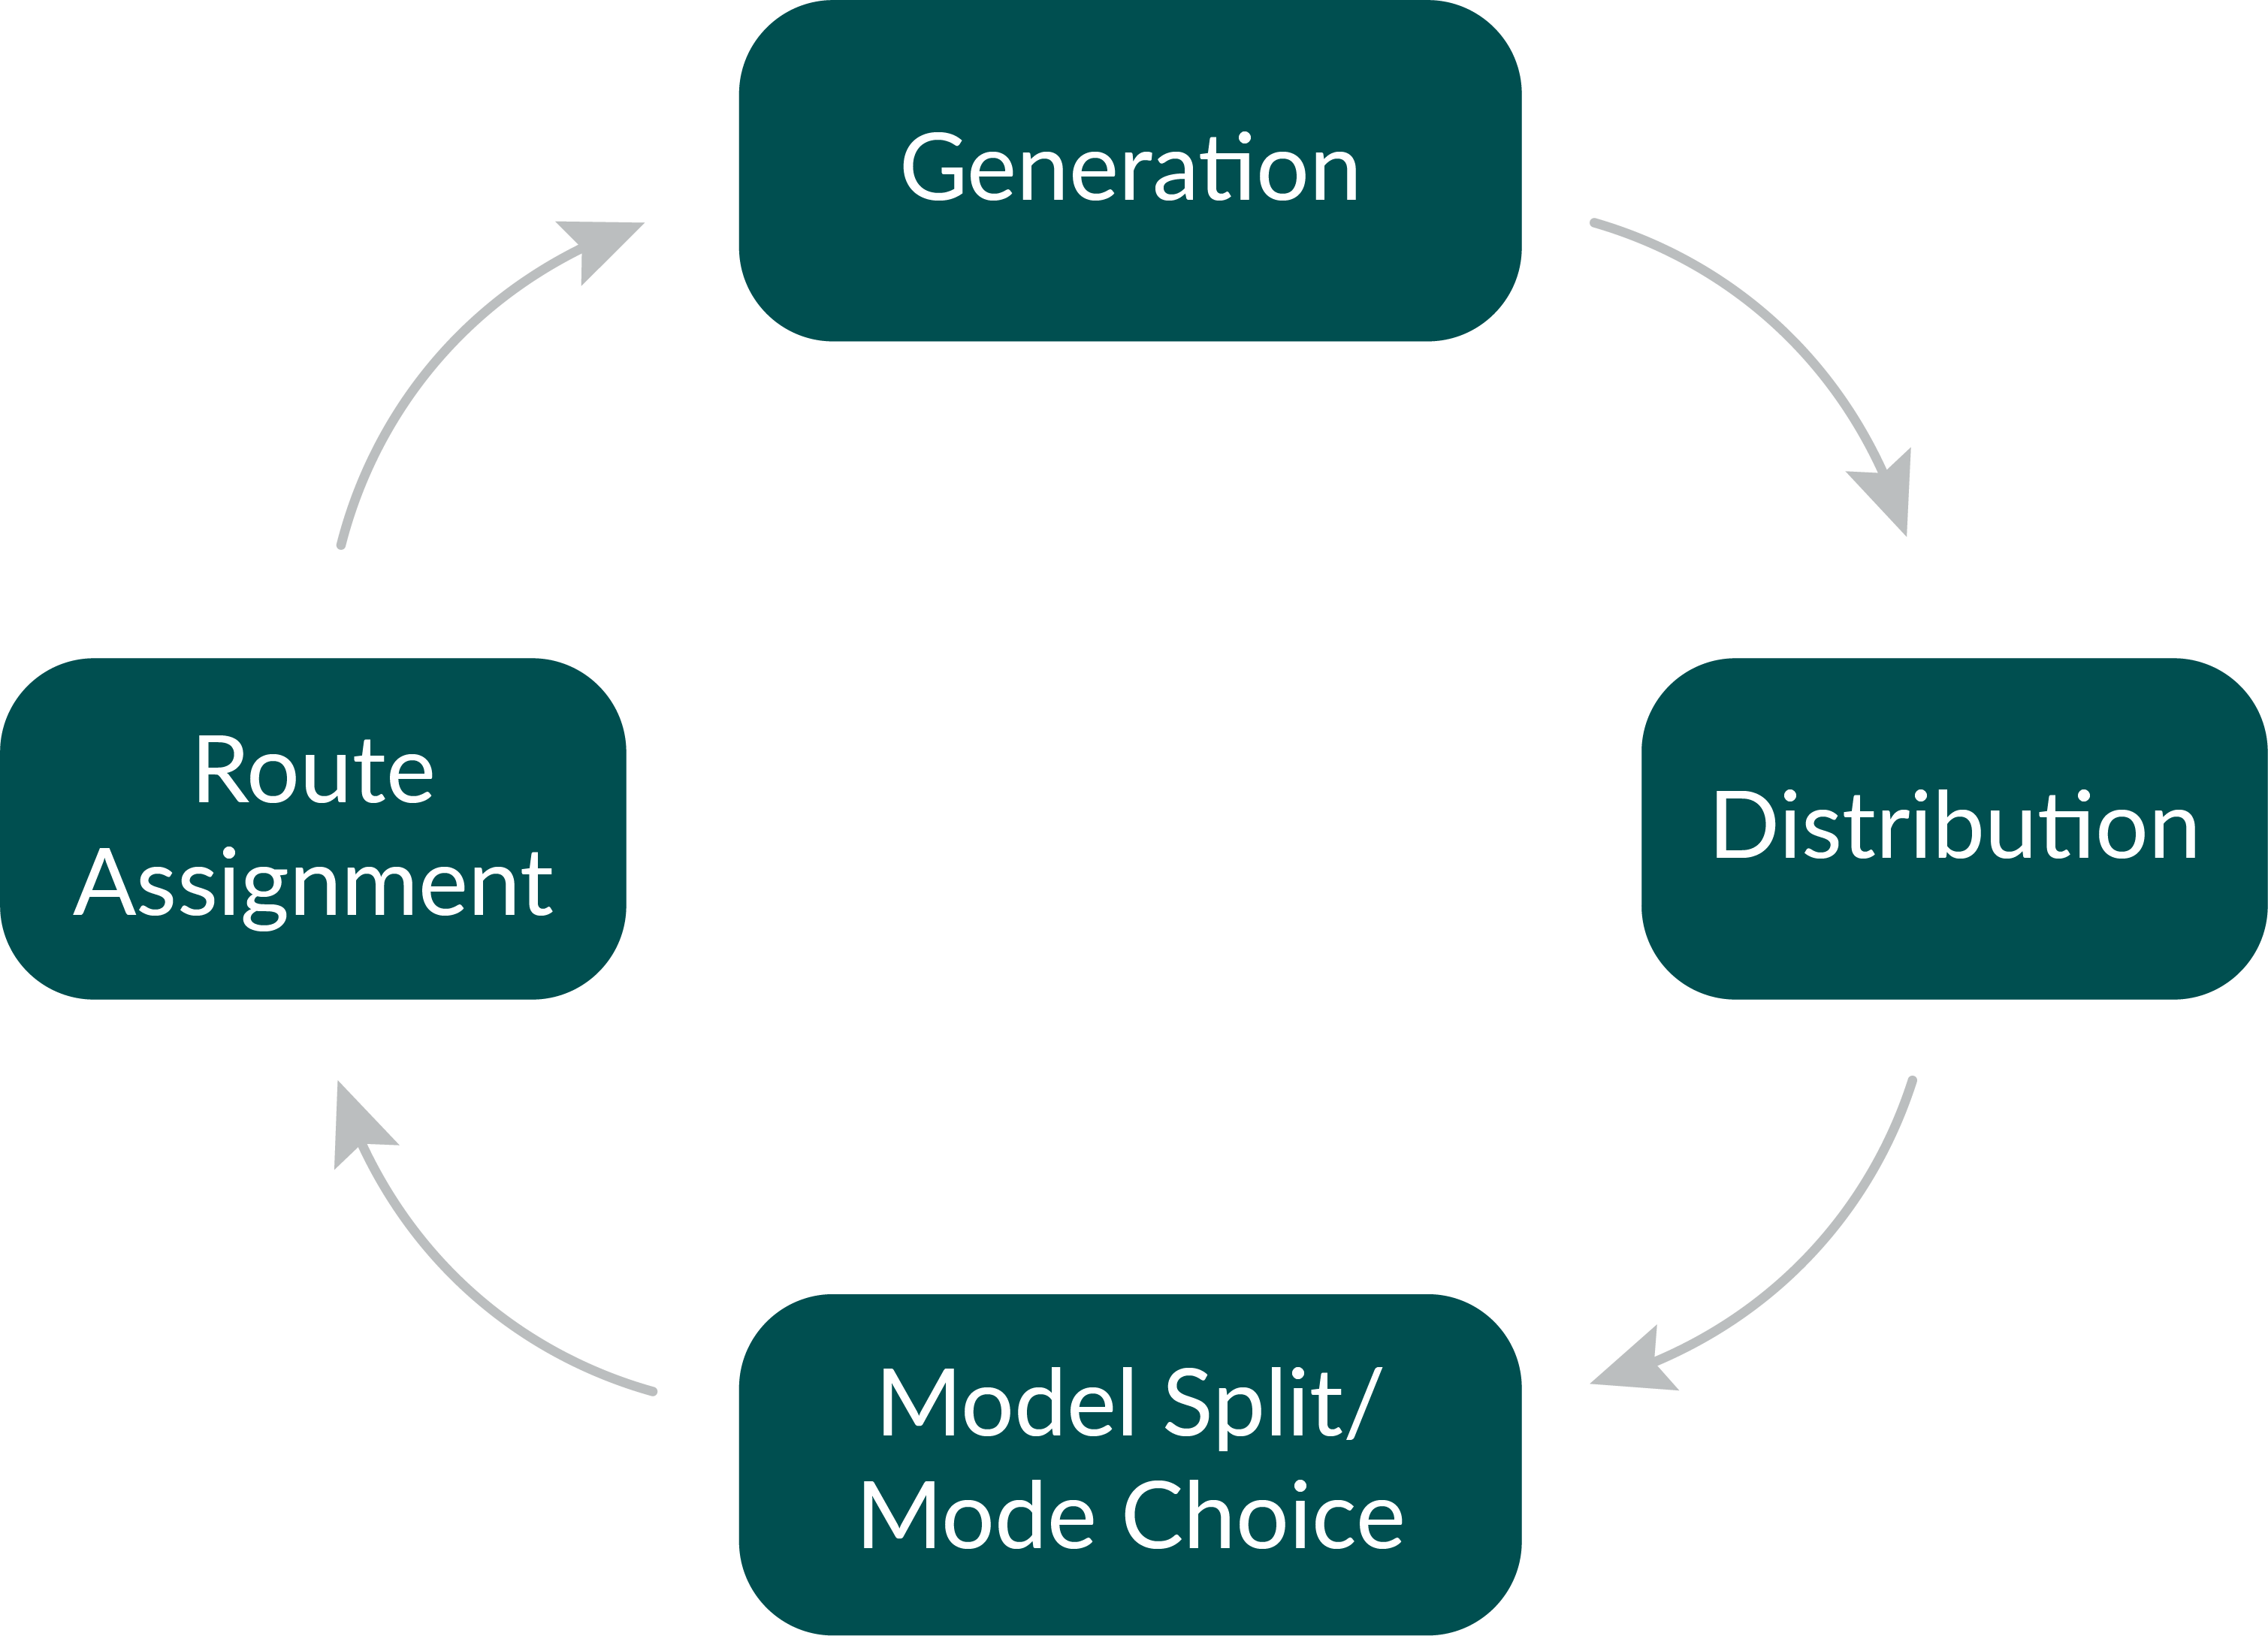 4 Step Model for Traffic Assignment: Generation, Distribution, Model Split/Mode Choice, Route Assignment